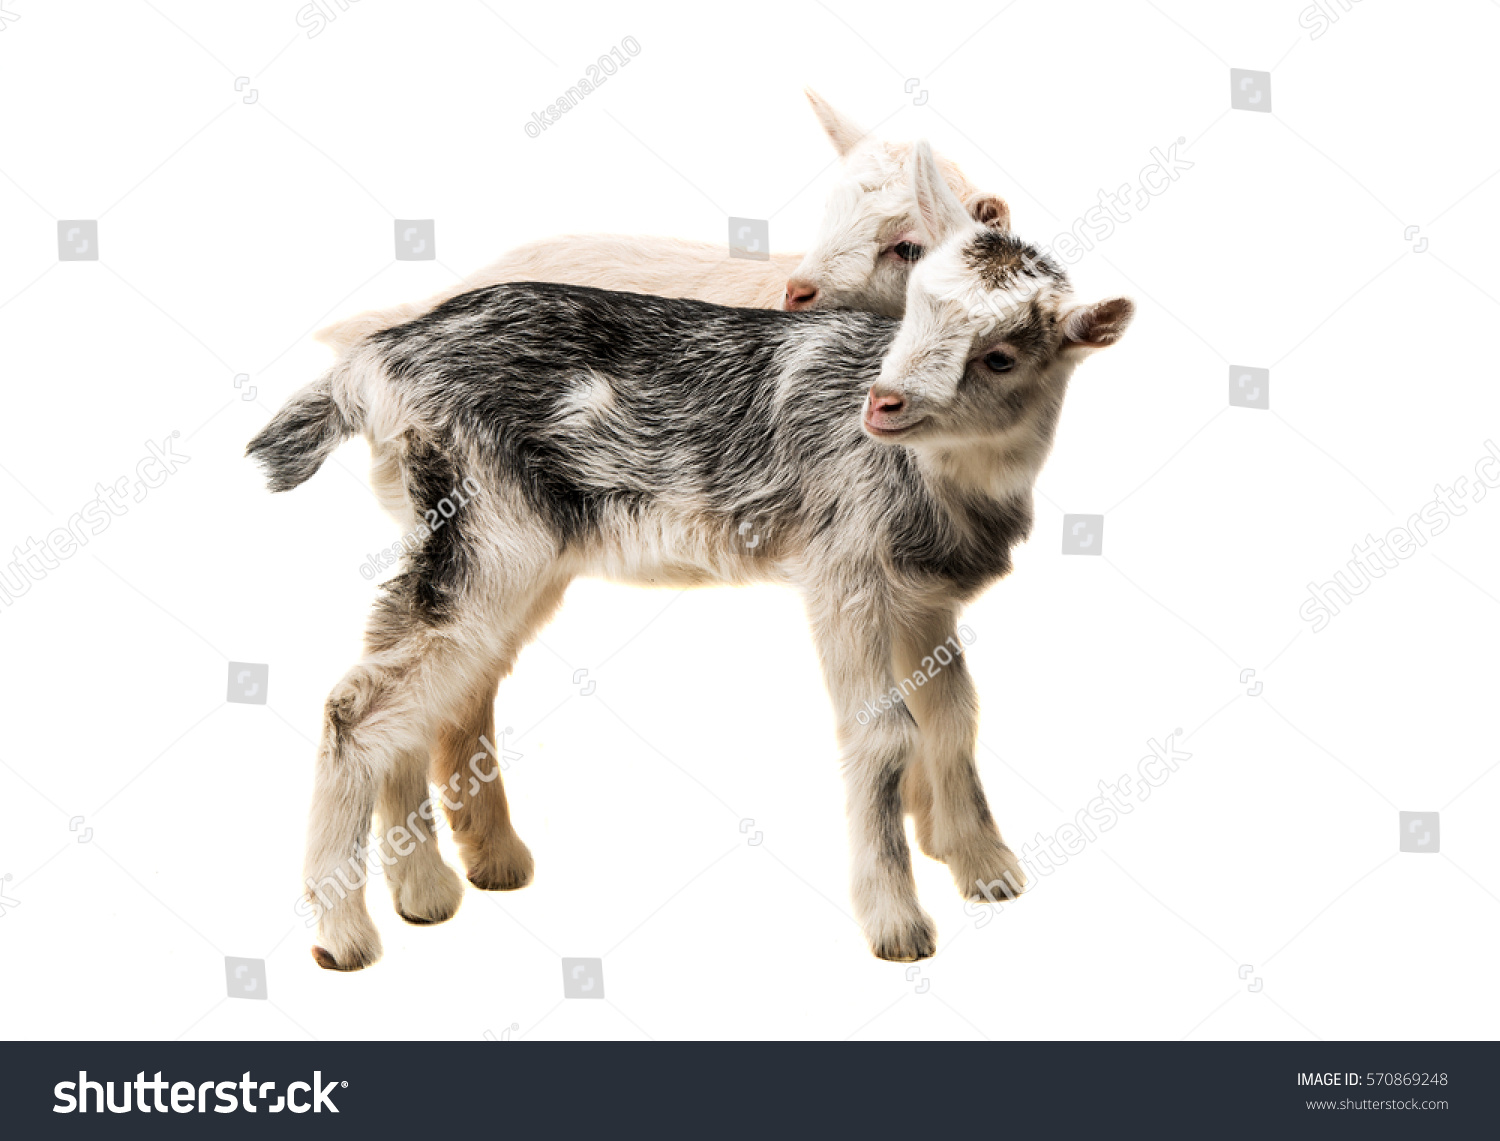 small goats isolated on white background #570869248